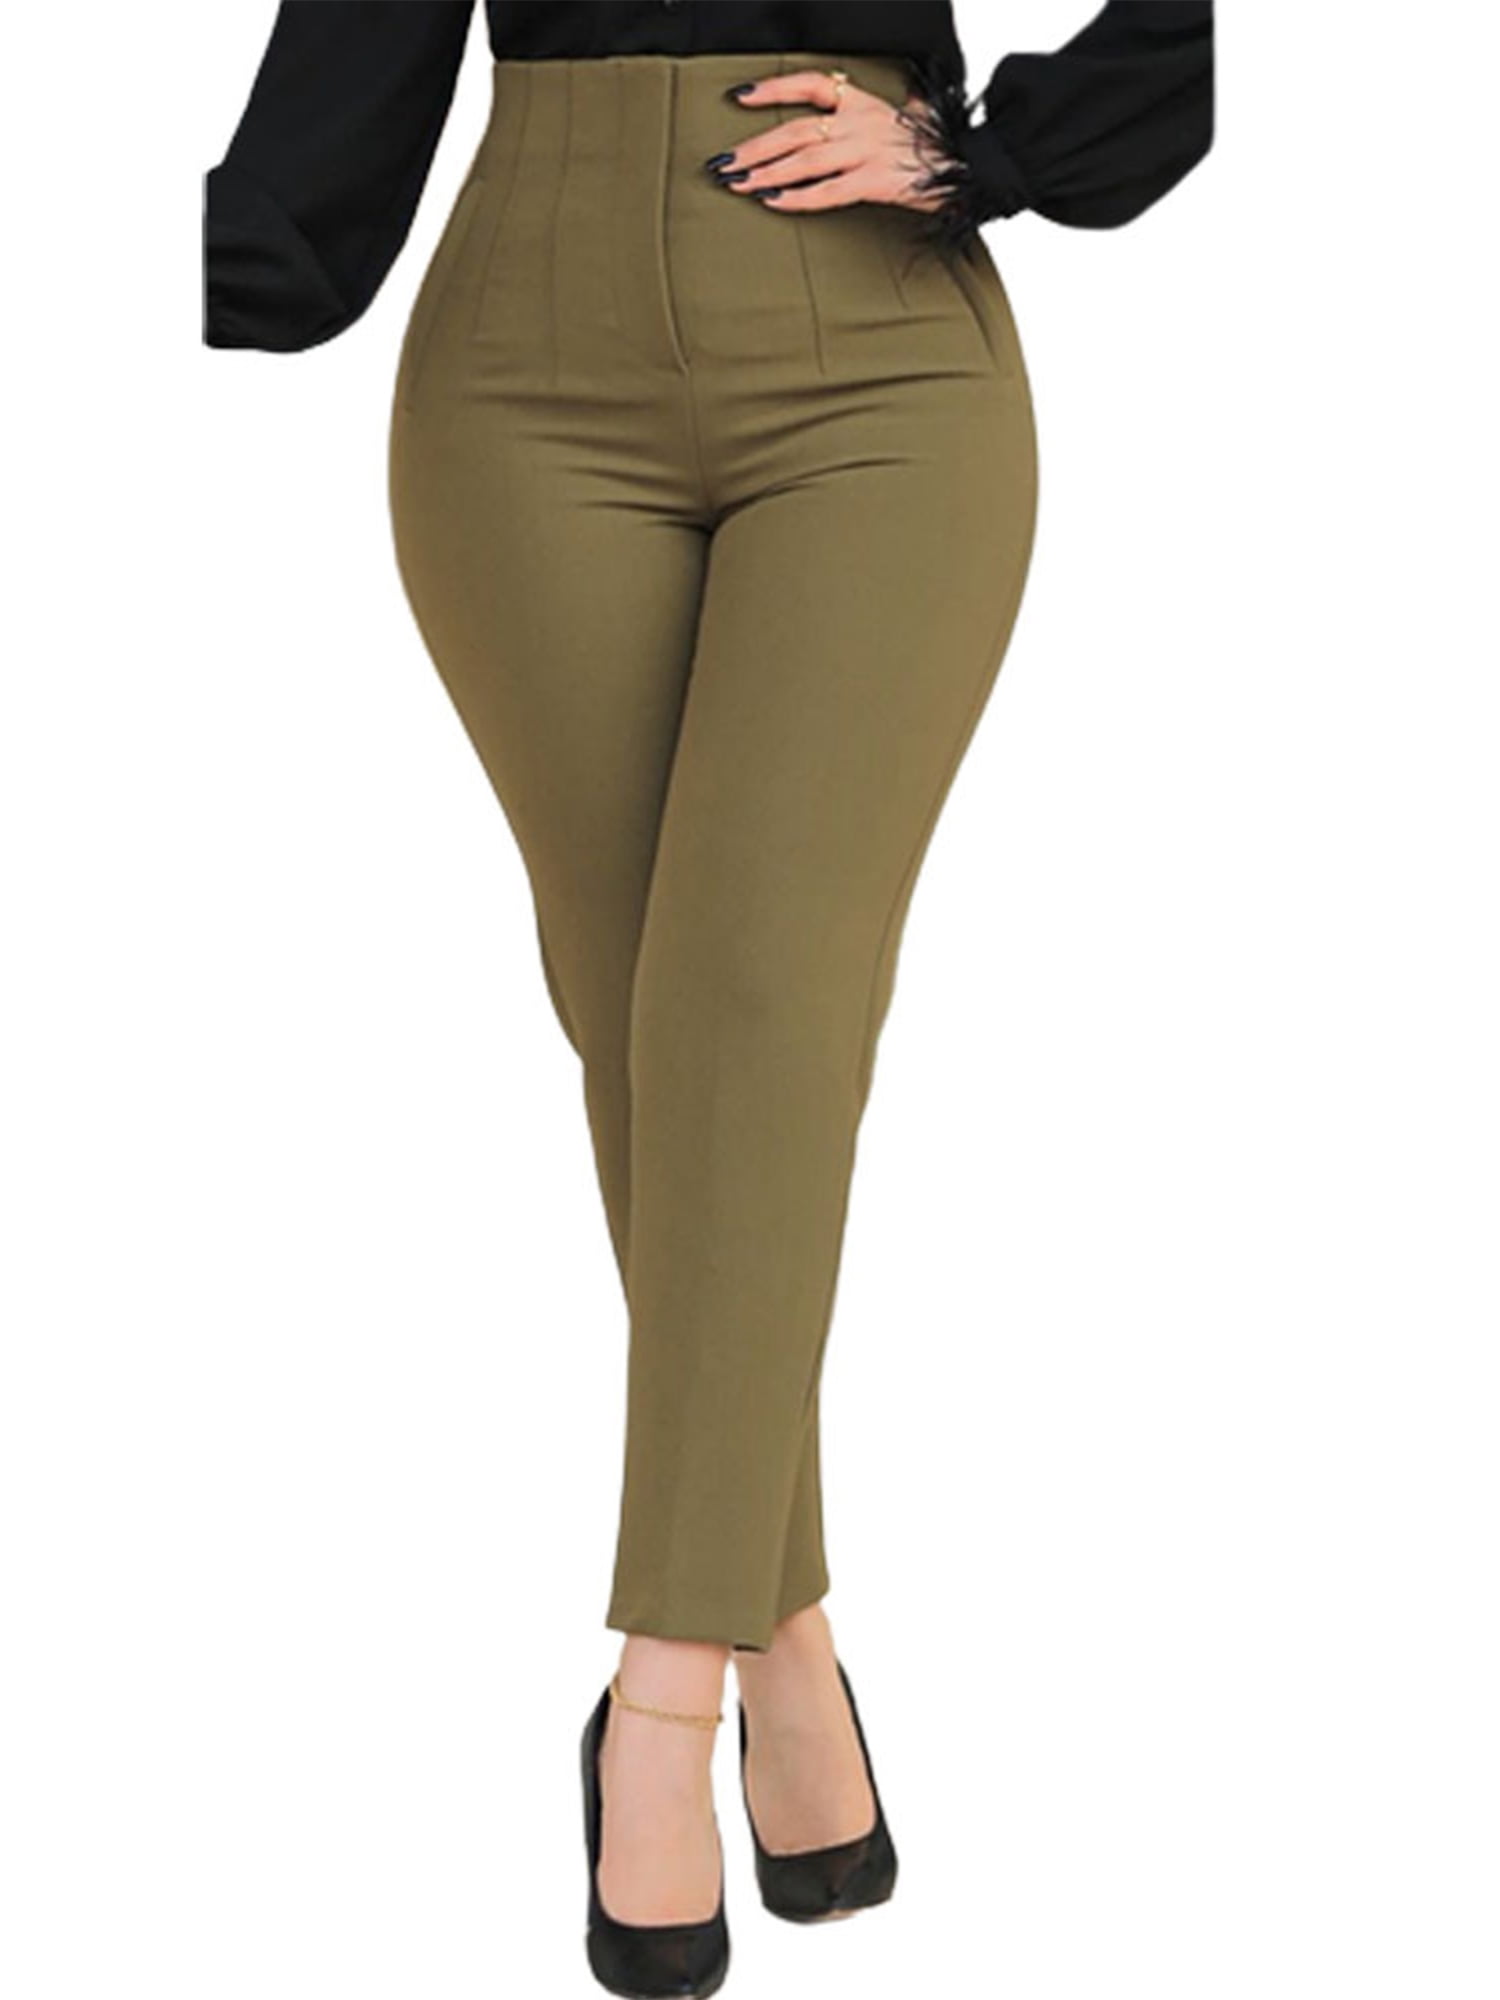  Dress Pants for Womens Work Business Pants Tummy Control Office  Straight Leg Professional Petite 29 Inseam Blue Trousers High Waisted Ladies  Slacks : Clothing, Shoes & Jewelry